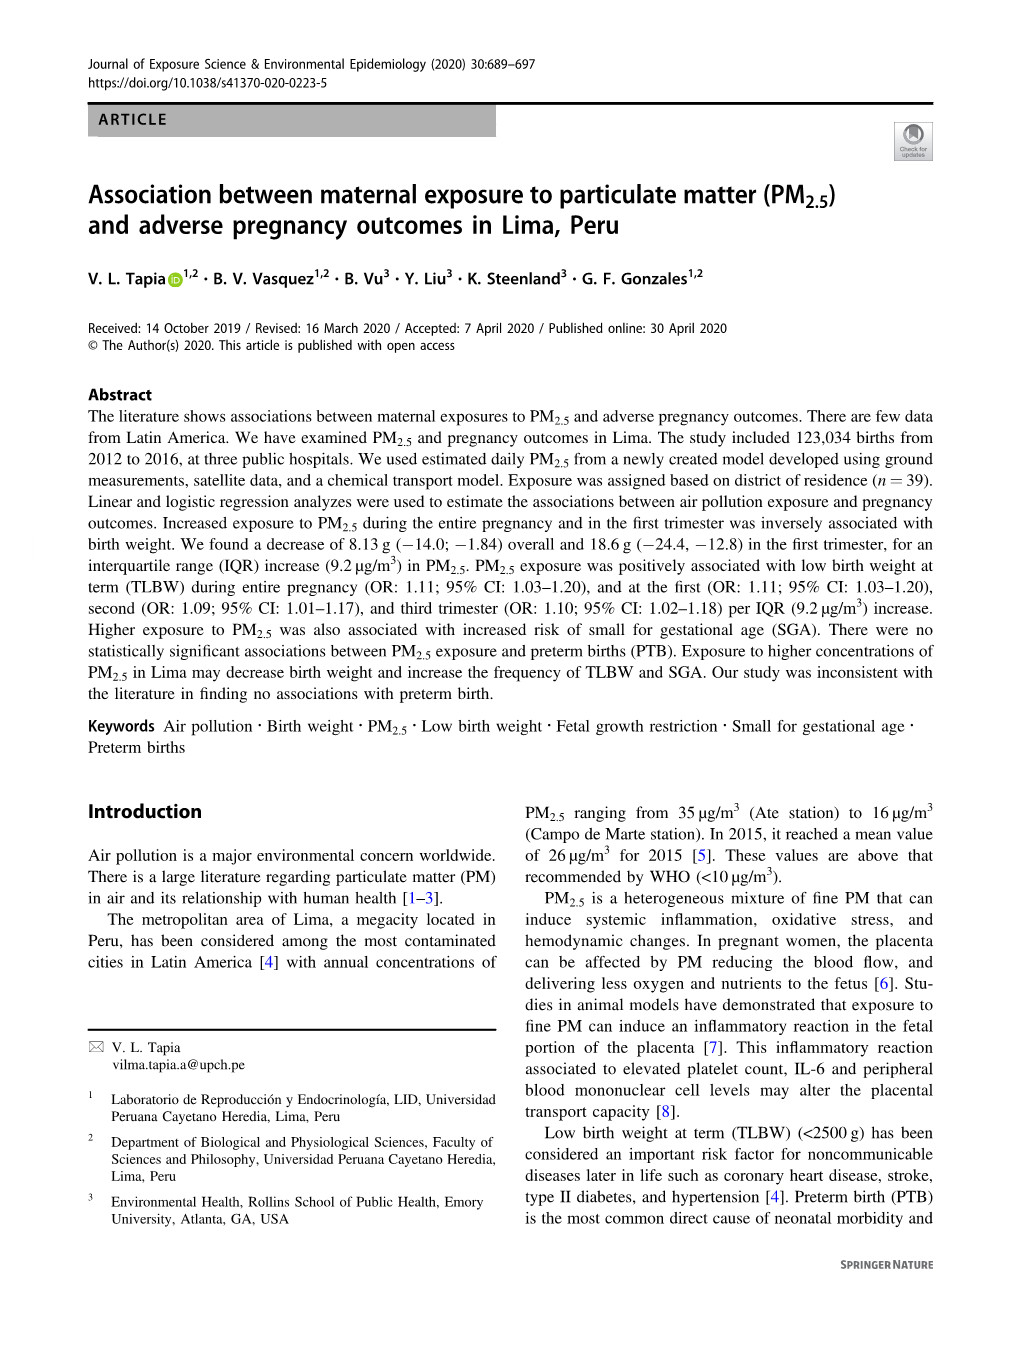 Association Between Maternal Exposure to Particulate Matter (PM2.5) and Adverse Pregnancy Outcomes in Lima, Peru